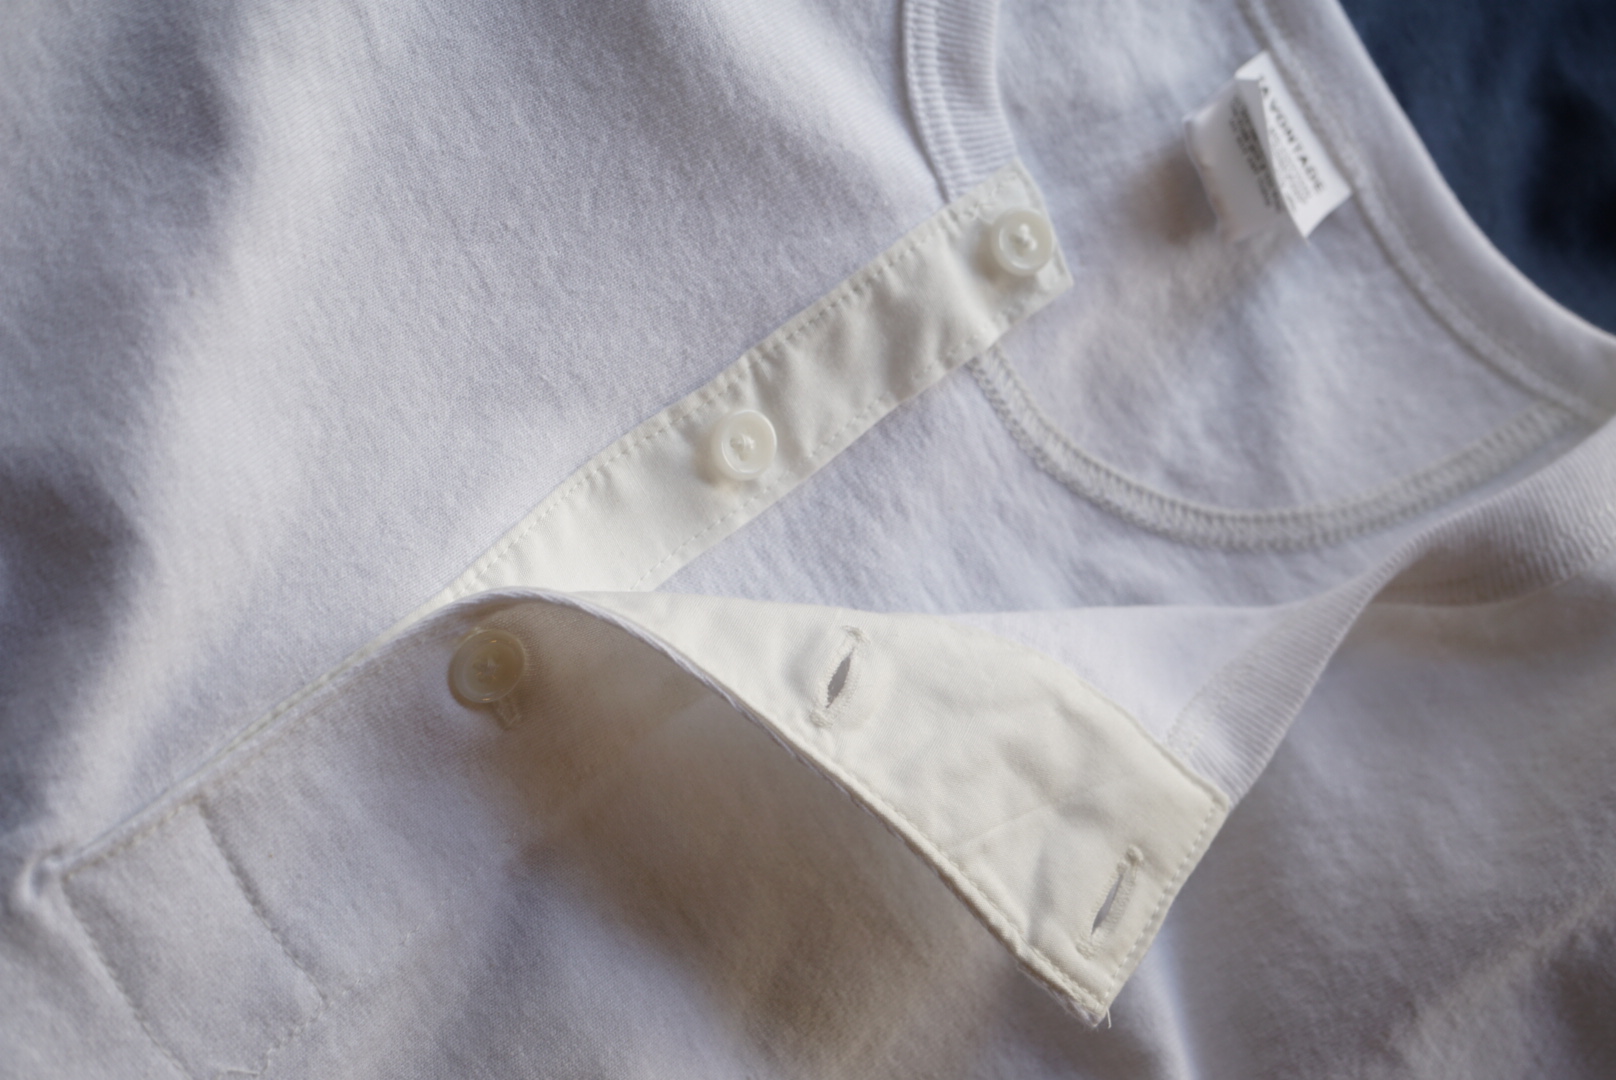 HENLY NECK S/S